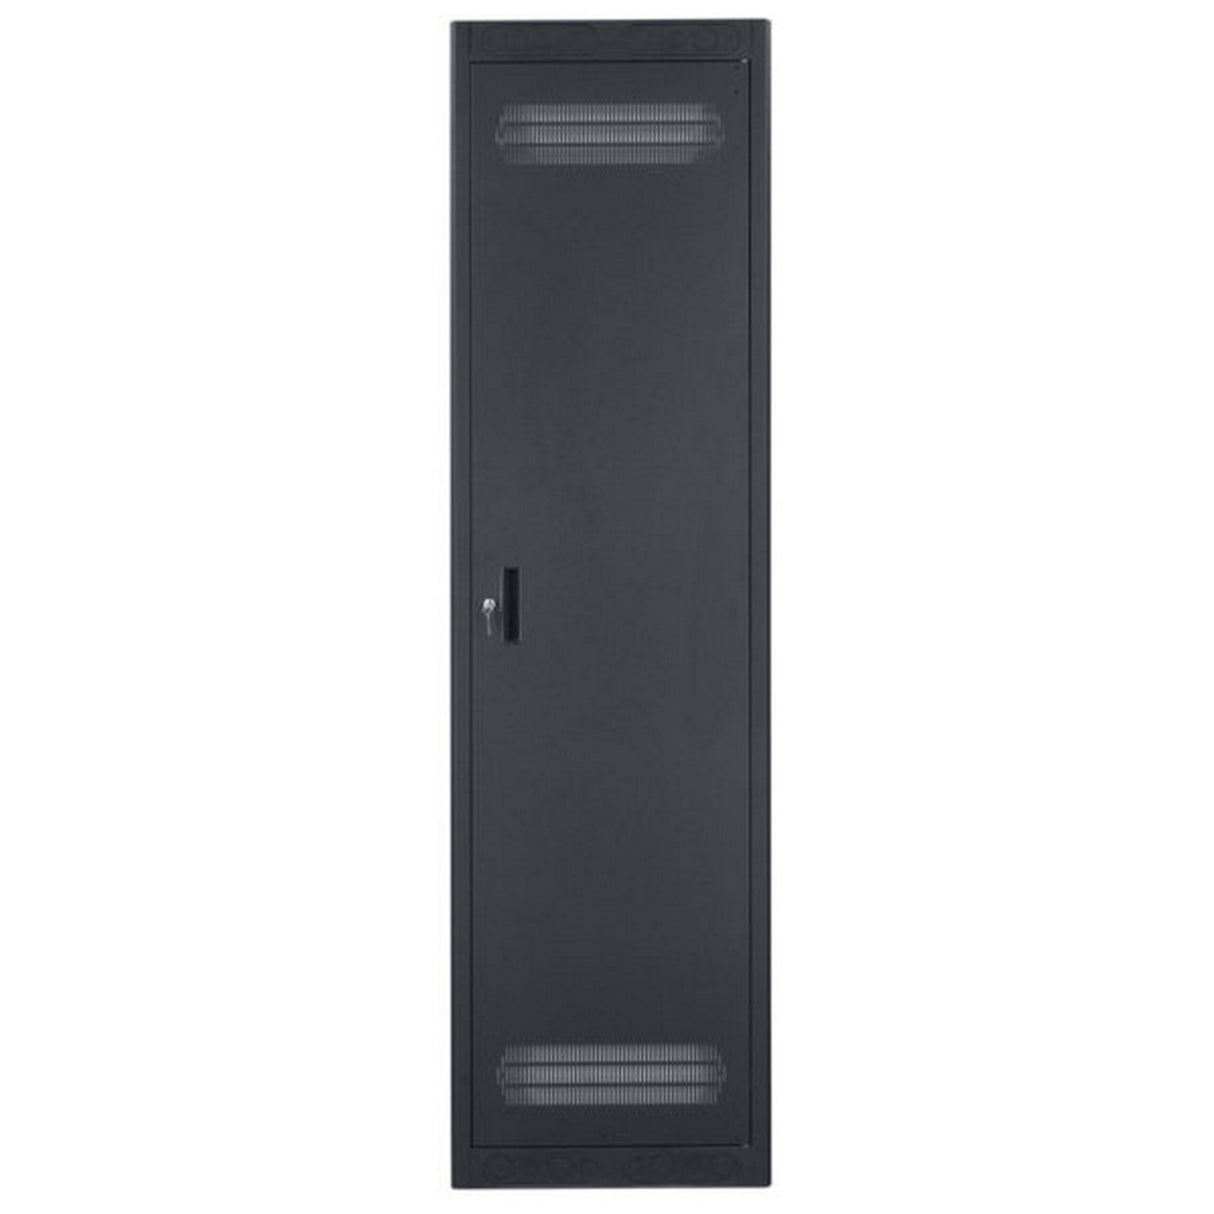 Lowell LER-4422 Enclosed Rack with Rear Door, 44 x 22 Inch